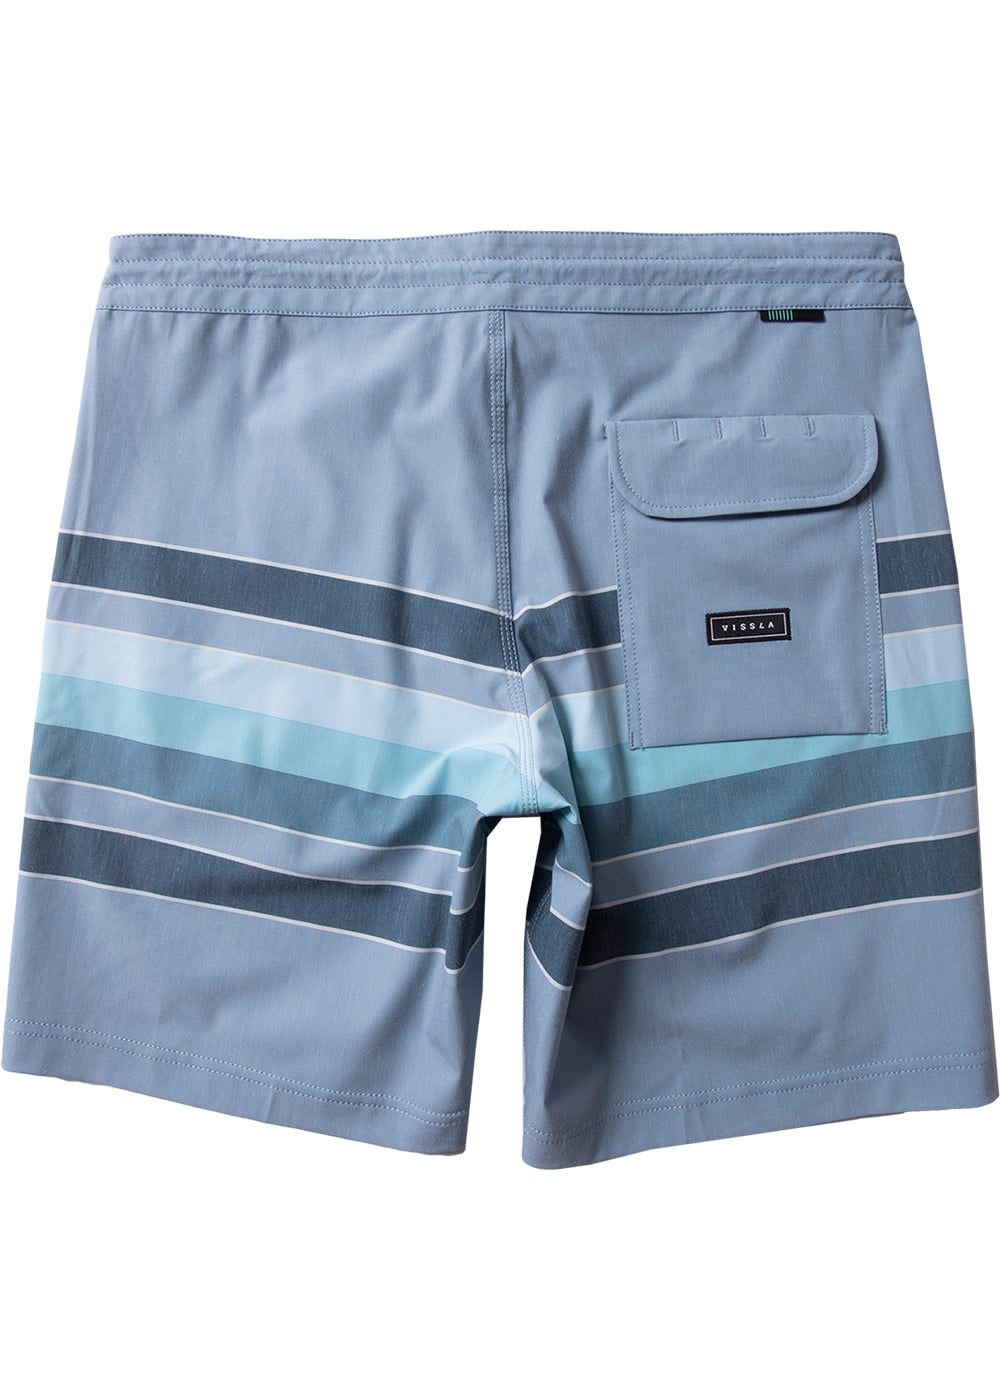 Vissla Men's Fist Bump 18.5" boardshort. Faded denim front view. Includes dark blue and light blue horizontal thick stripes. Back View 